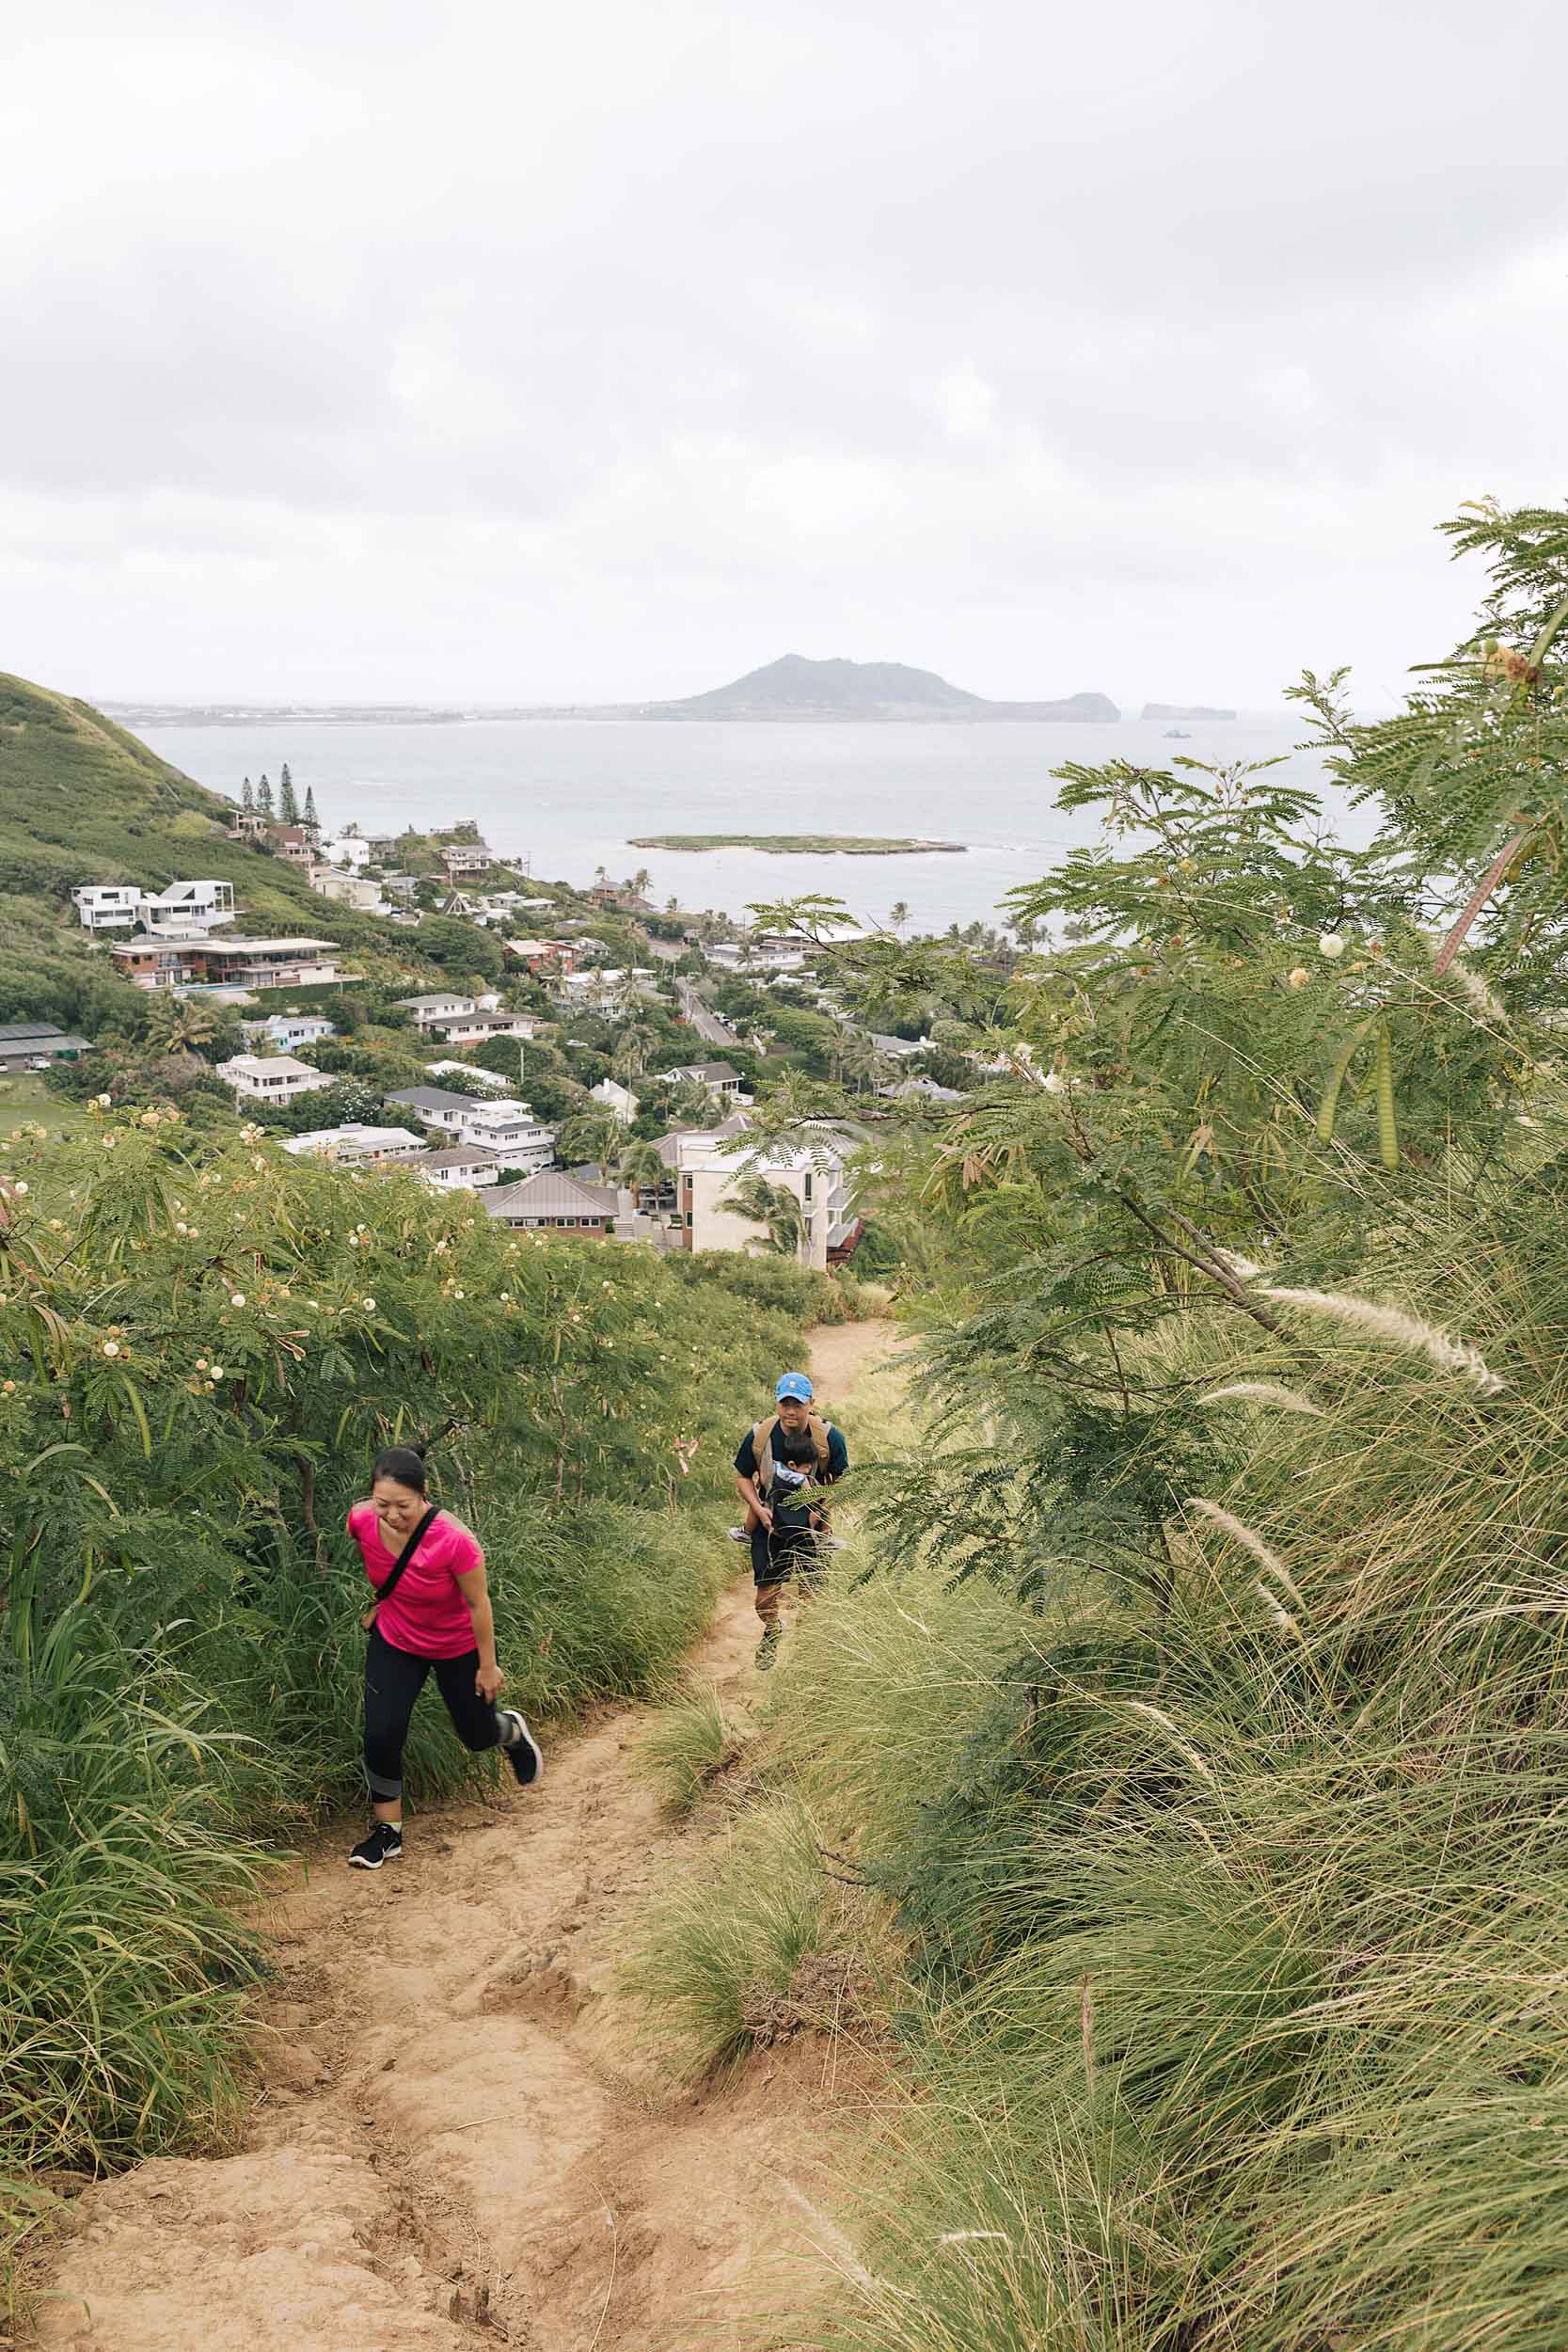 Hikers about halfway up the Pillbox hike